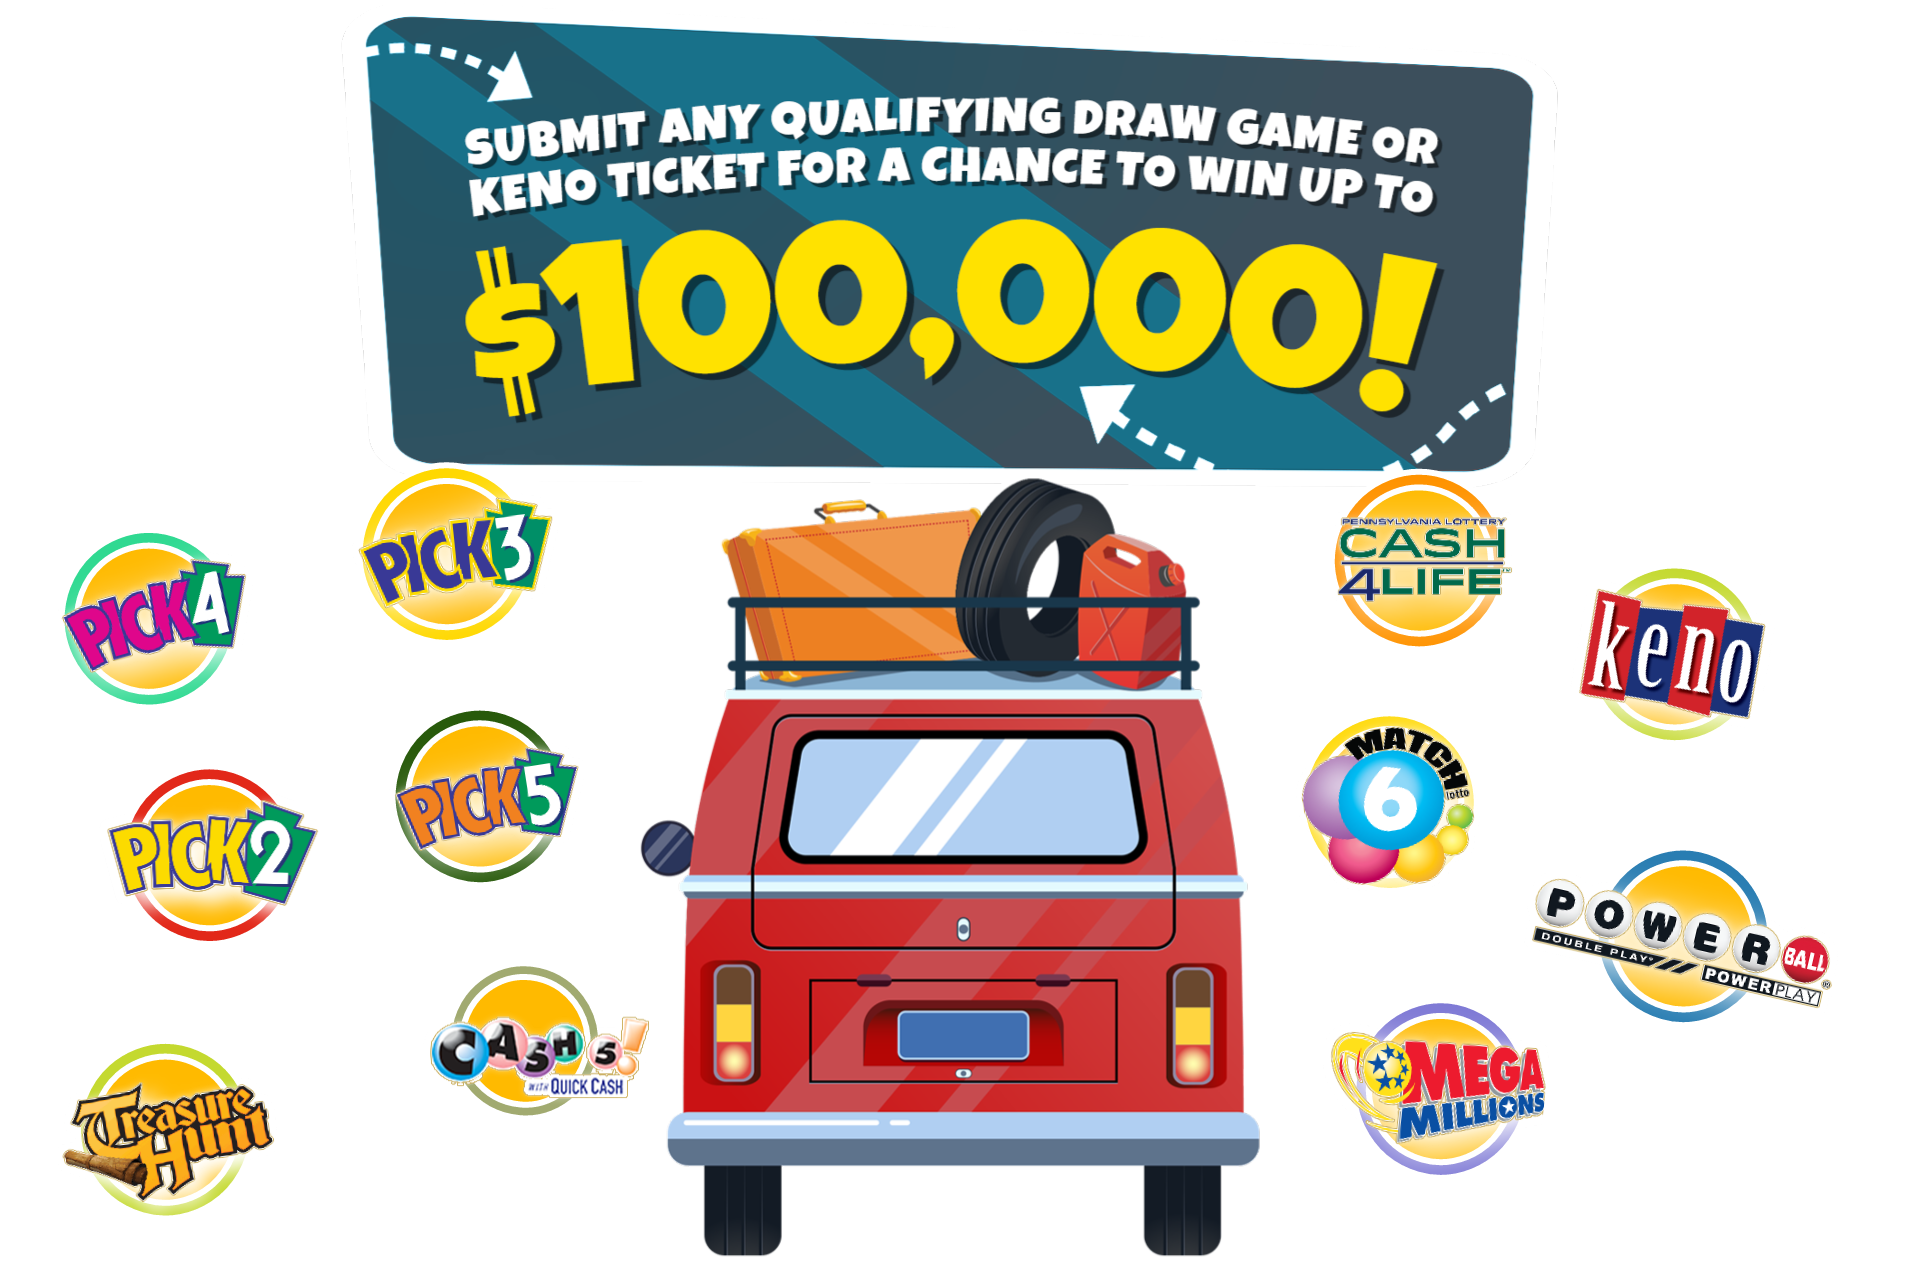 Submit any qualifying draw game or keno ticket for a chance to win up to $100,000!